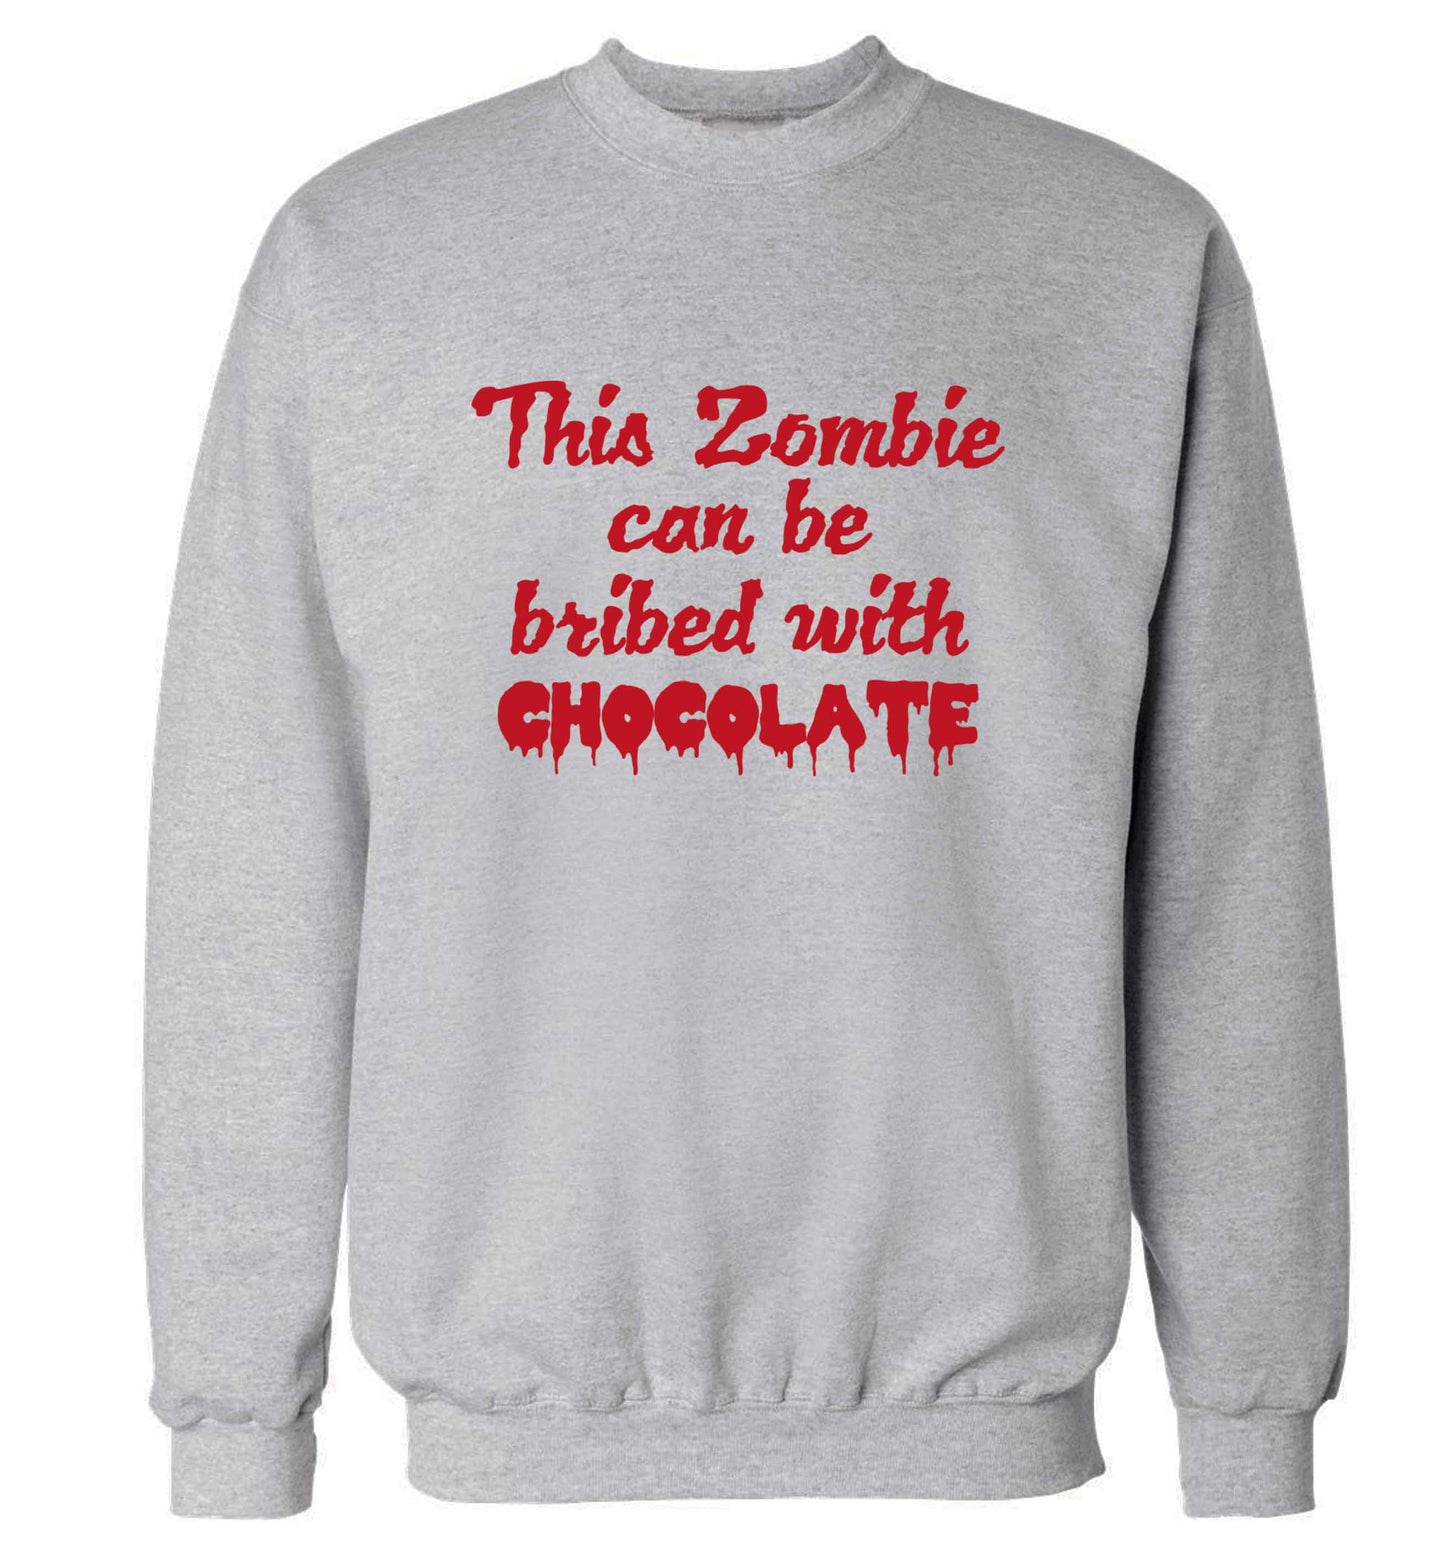 This zombie can be bribed with chocolate adult's unisex grey sweater 2XL